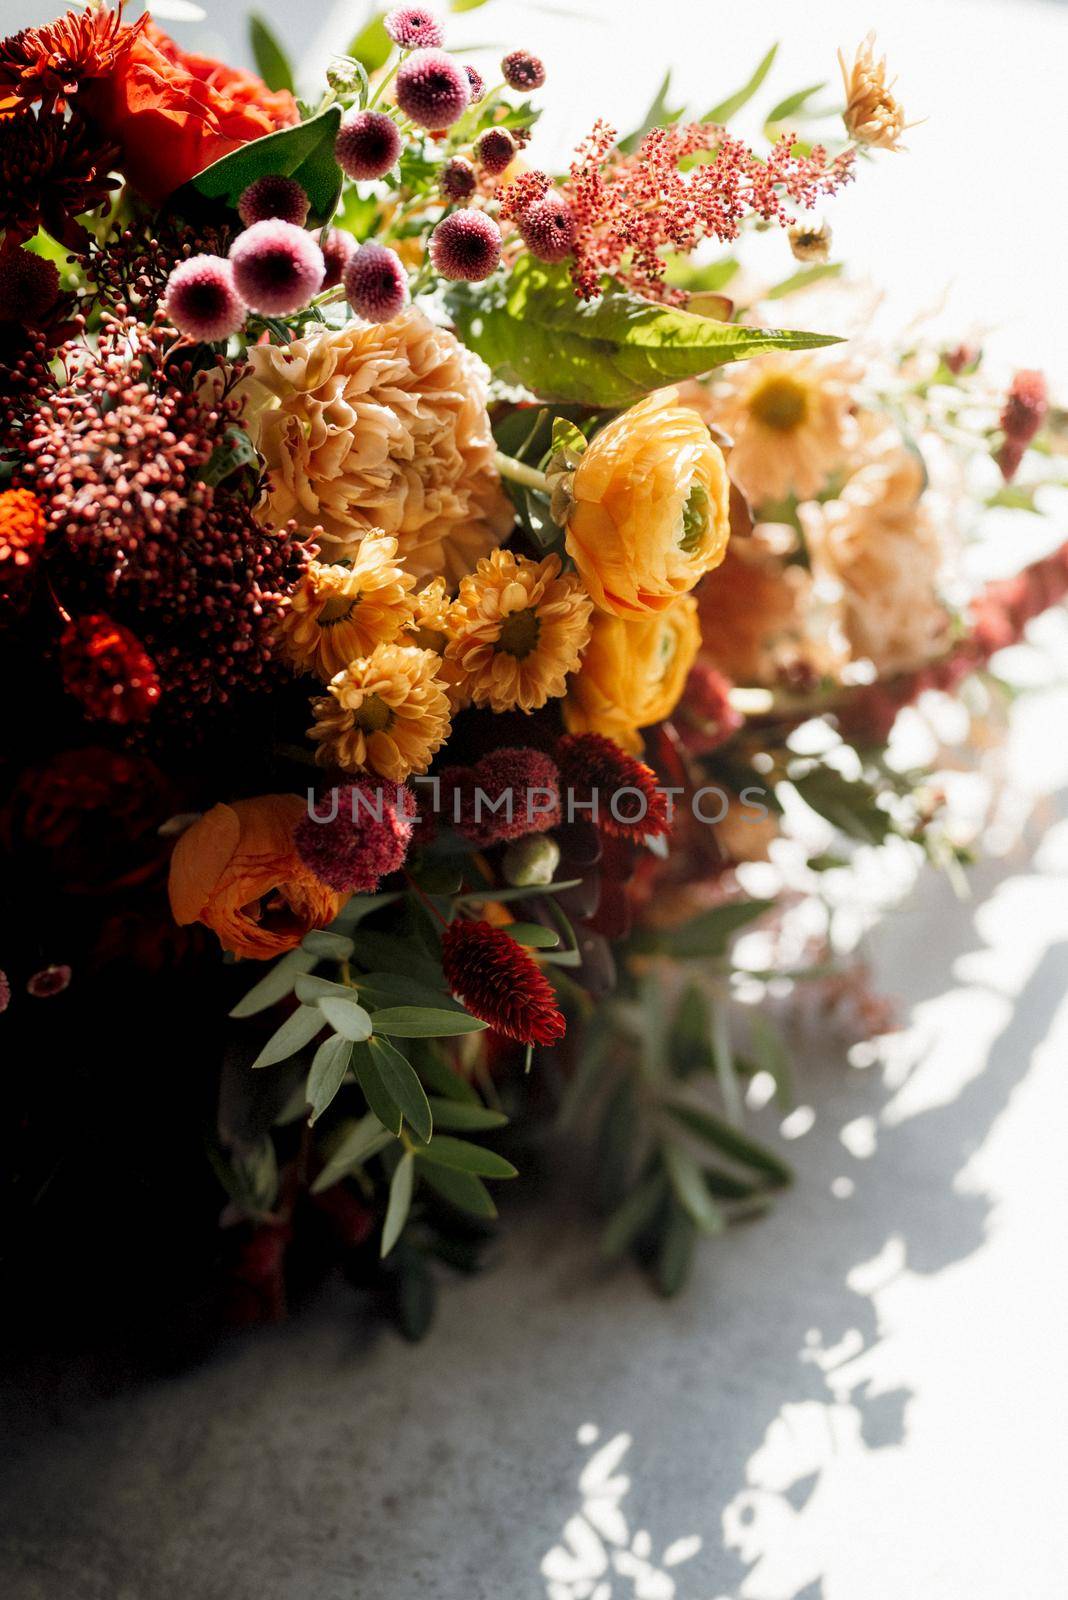 red elegant wedding bouquet of fresh natural flowers and greenery